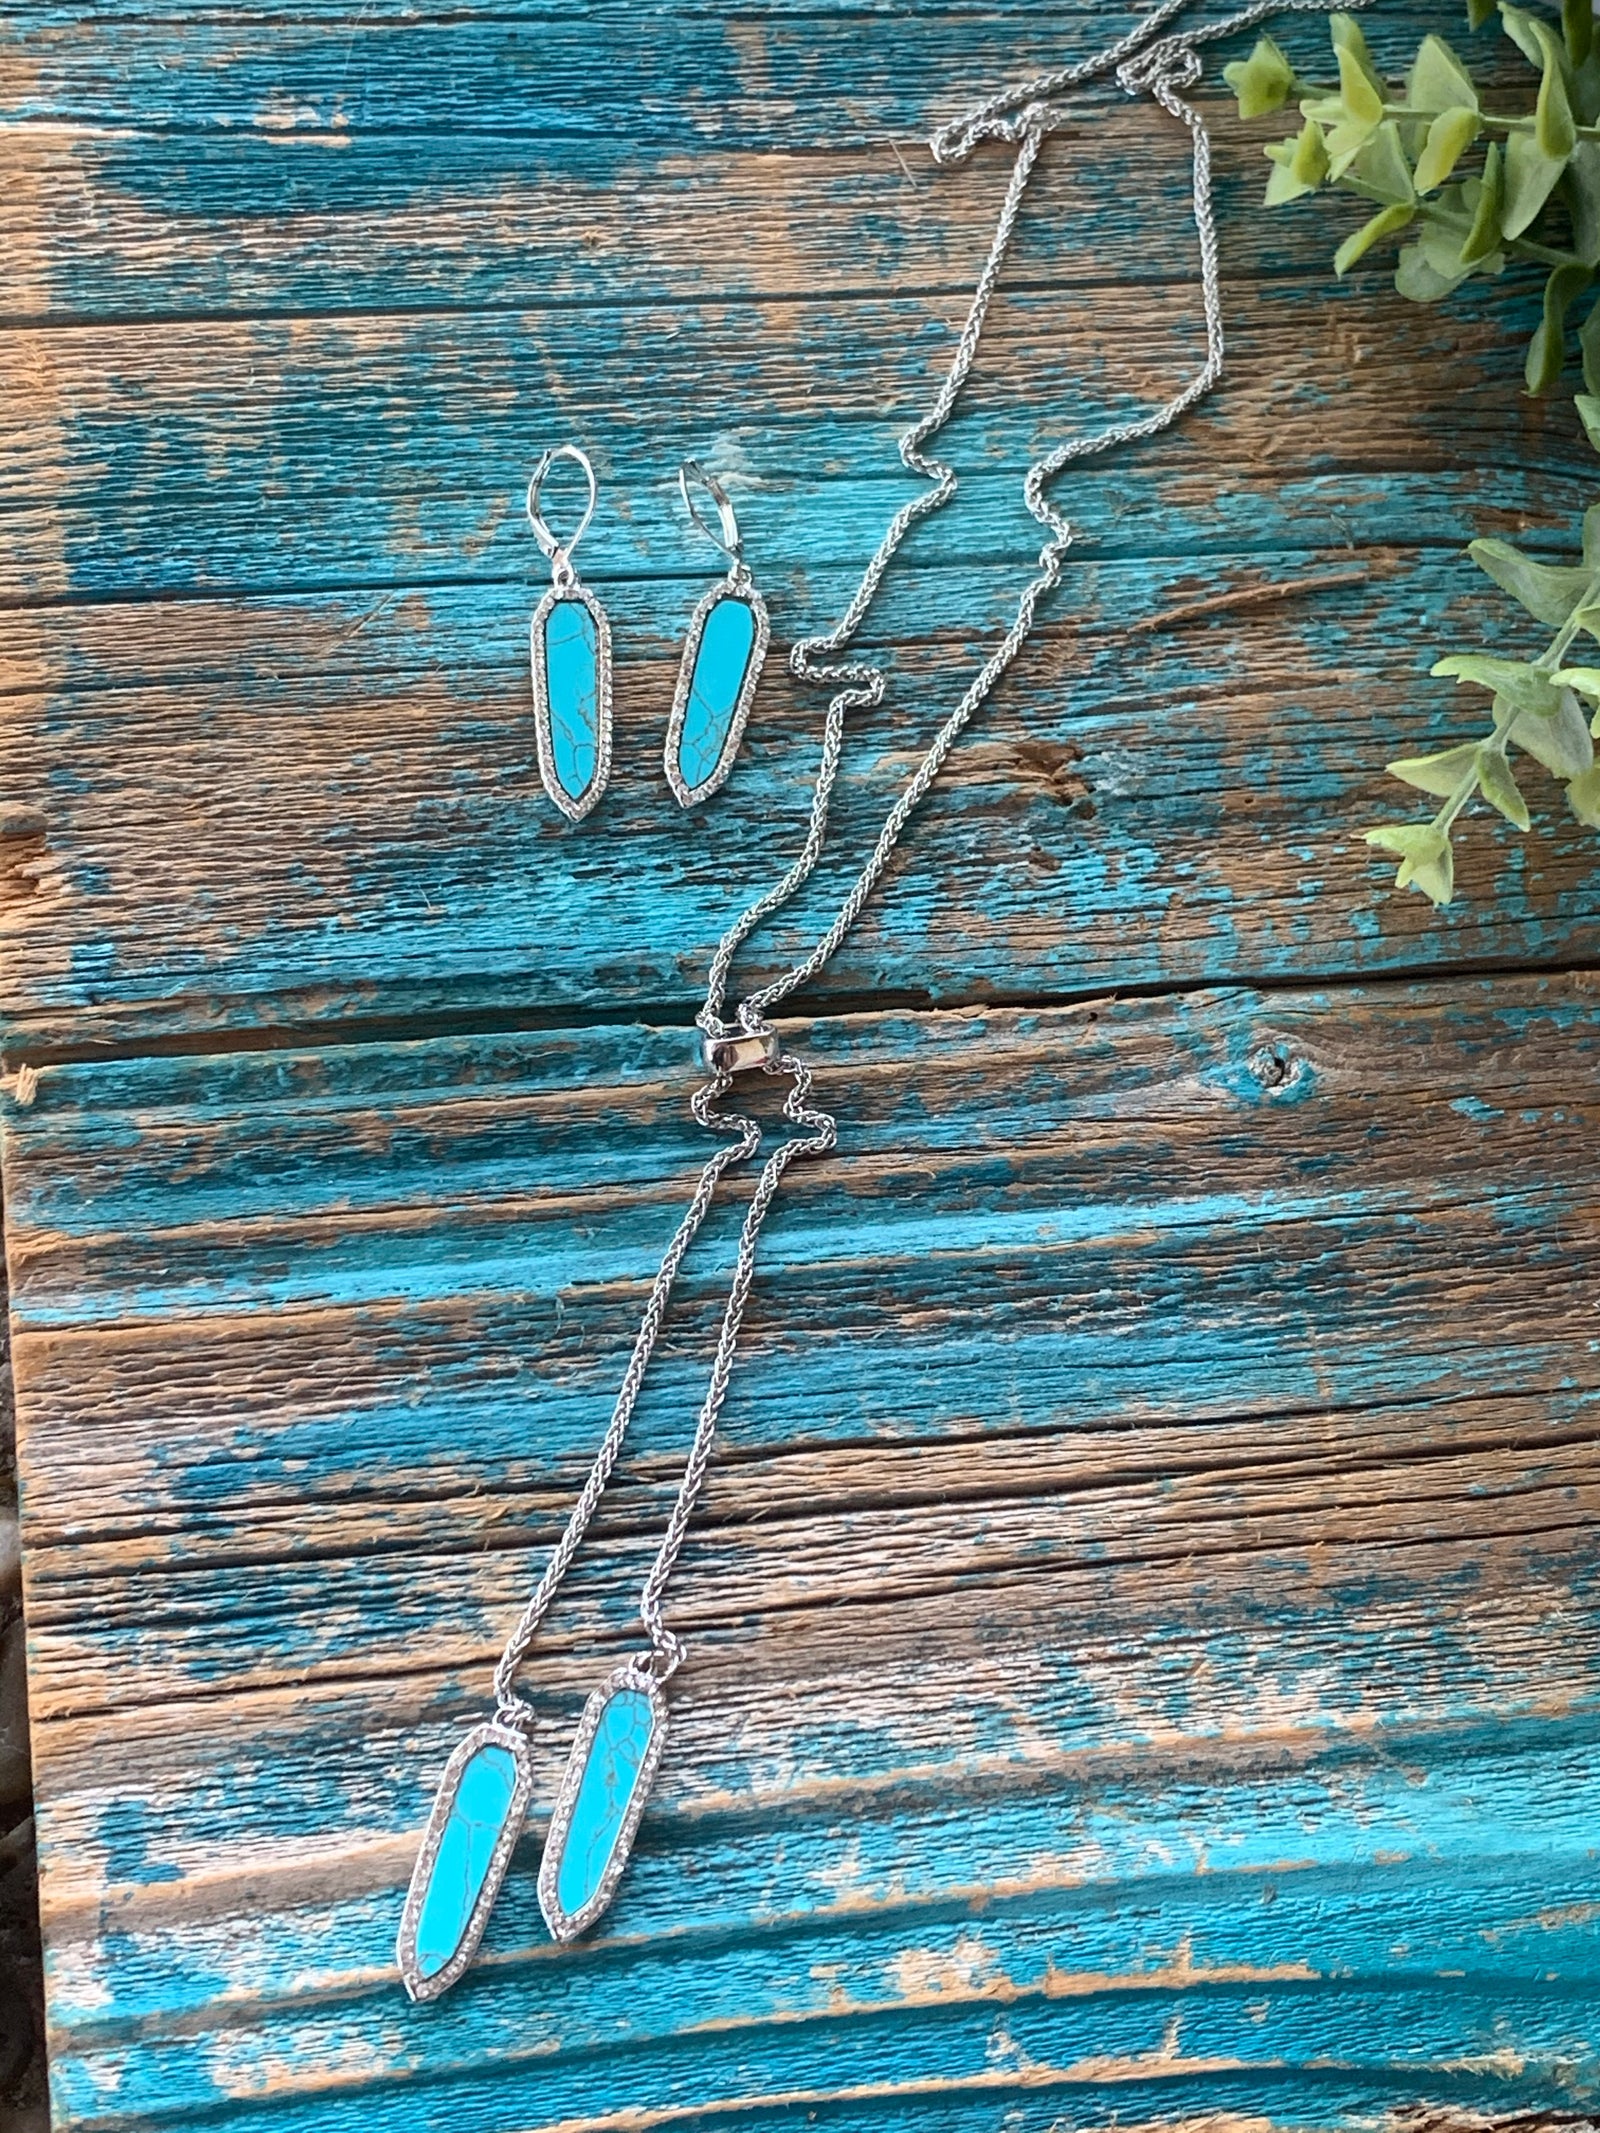 Silver Chain And Turquoise Stone Necklace Set